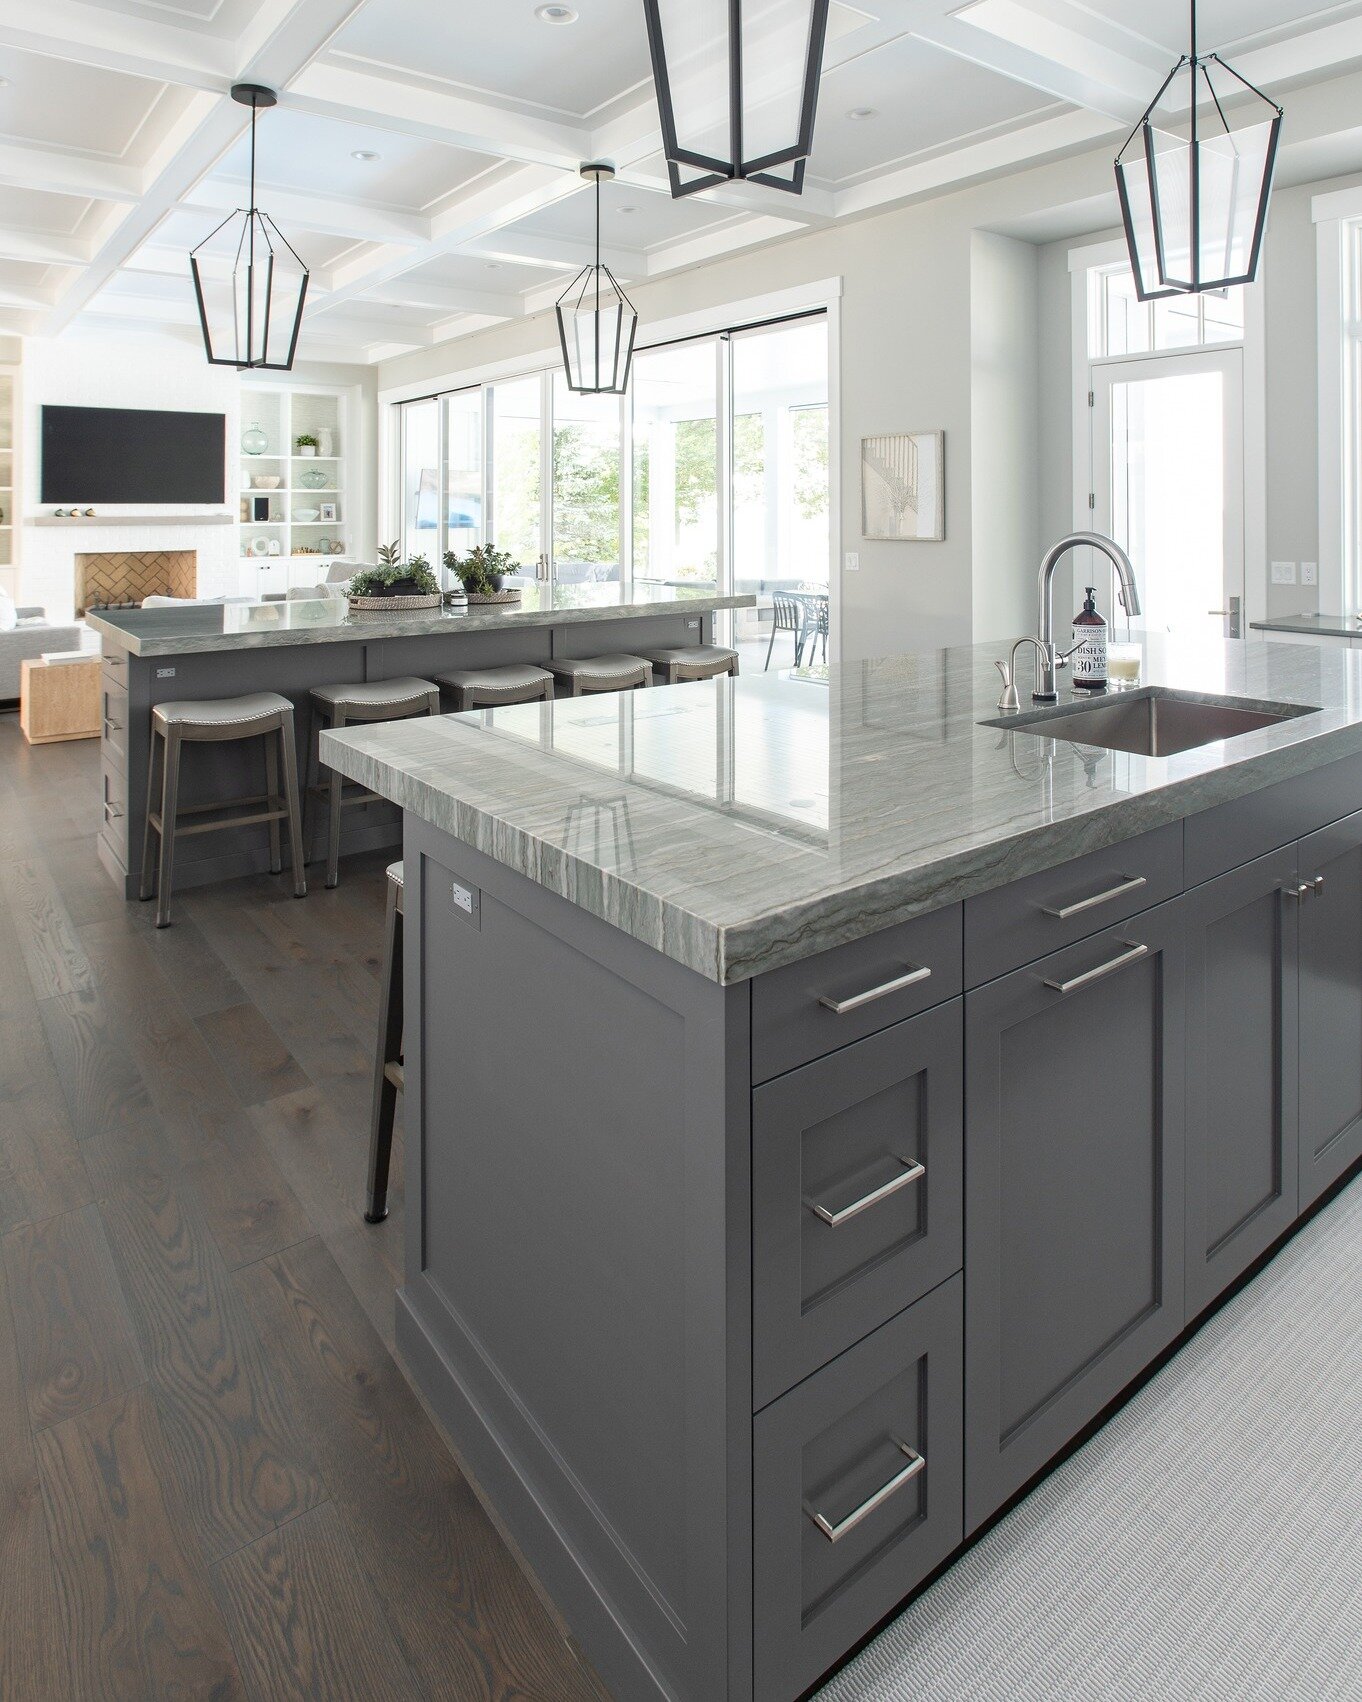 Double the islands, double the fun!  These kitchen islands are a game-changer, giving you all the room you need to whip up your favorite recipes and entertain your people.

Builder: @mikeschaapbuilders 
Design: @benchmarkdesignstudios 

#benchmarkwoo